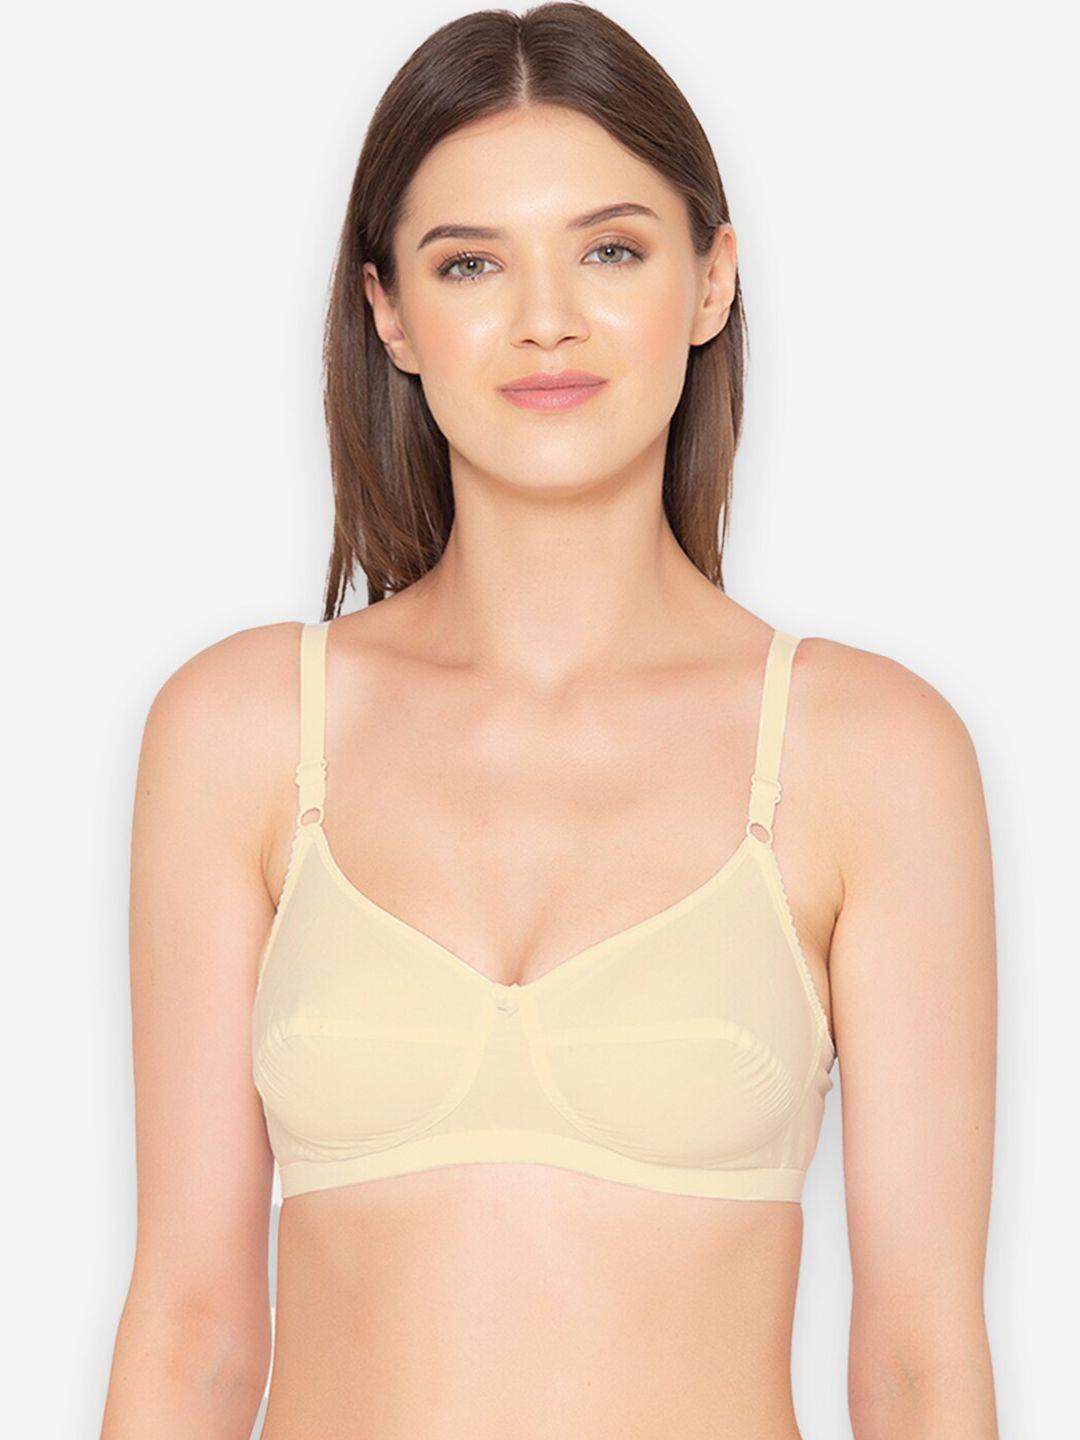 groversons paris beauty full coverage non padded non wired bra br009-skin-28b